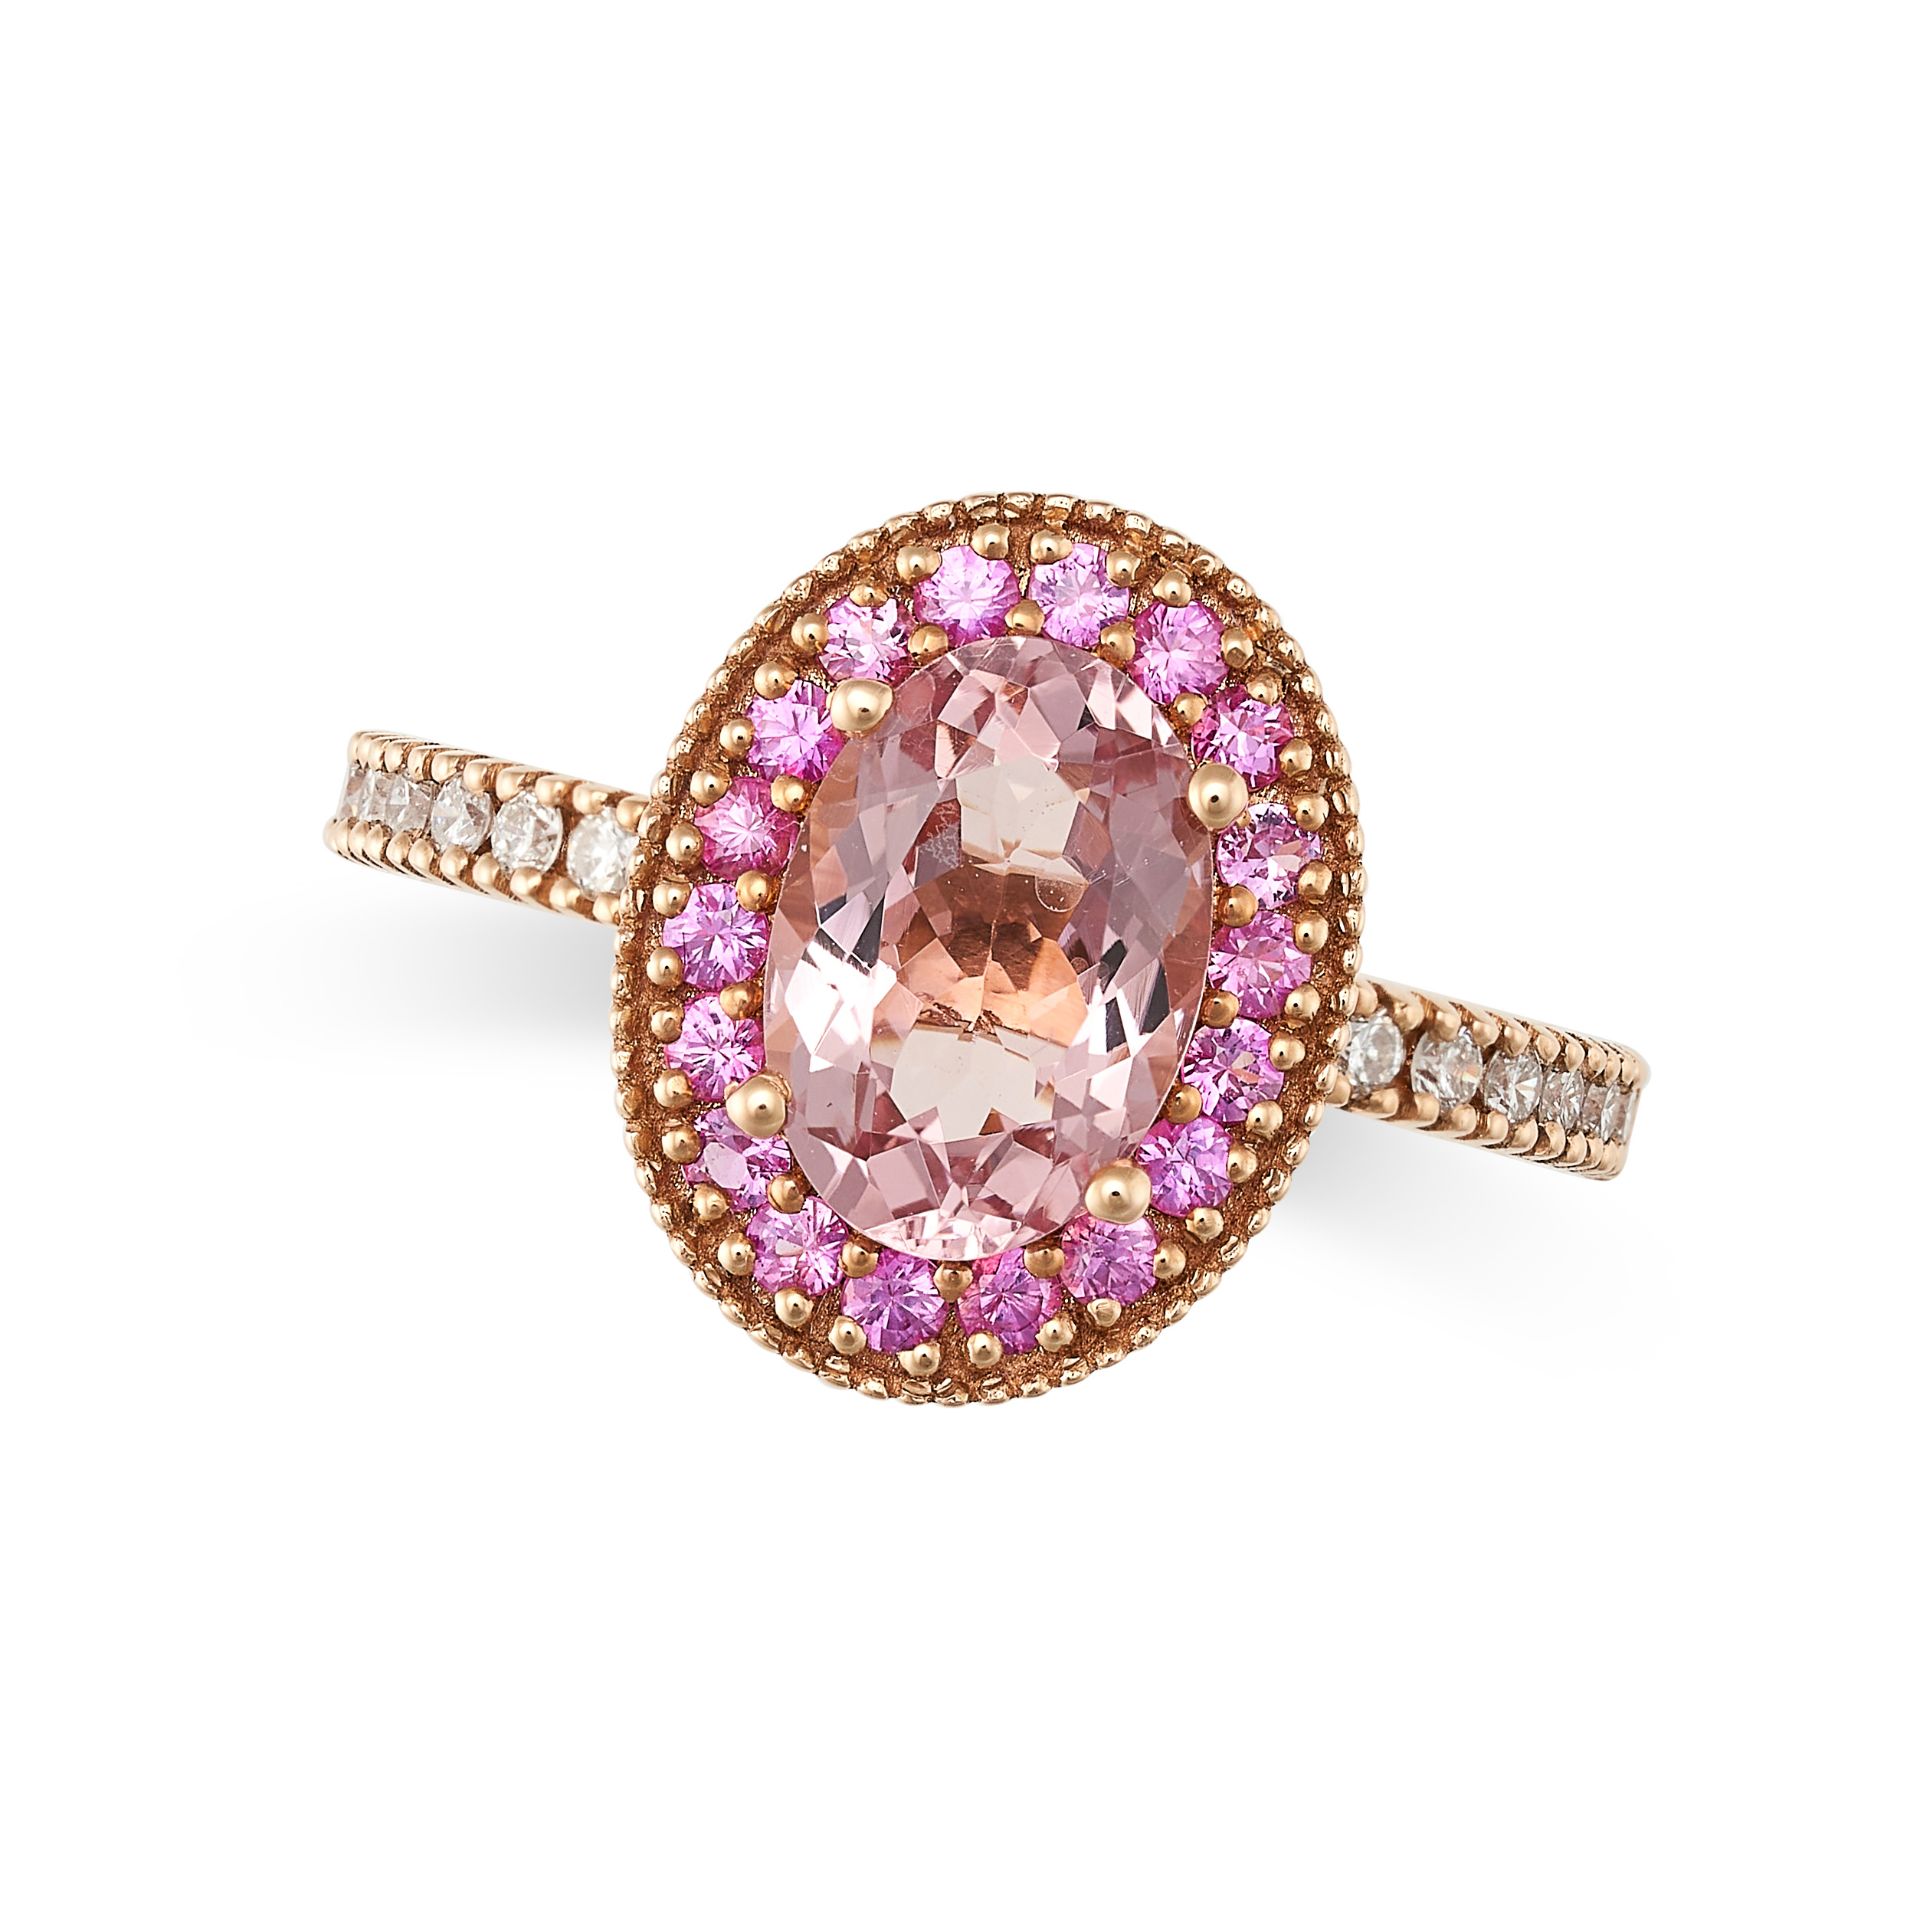 A MORGANITE, PINK SAPPHIRE AND DIAMOND DRESS RING in 18ct rose gold, set with an oval cut morgani...